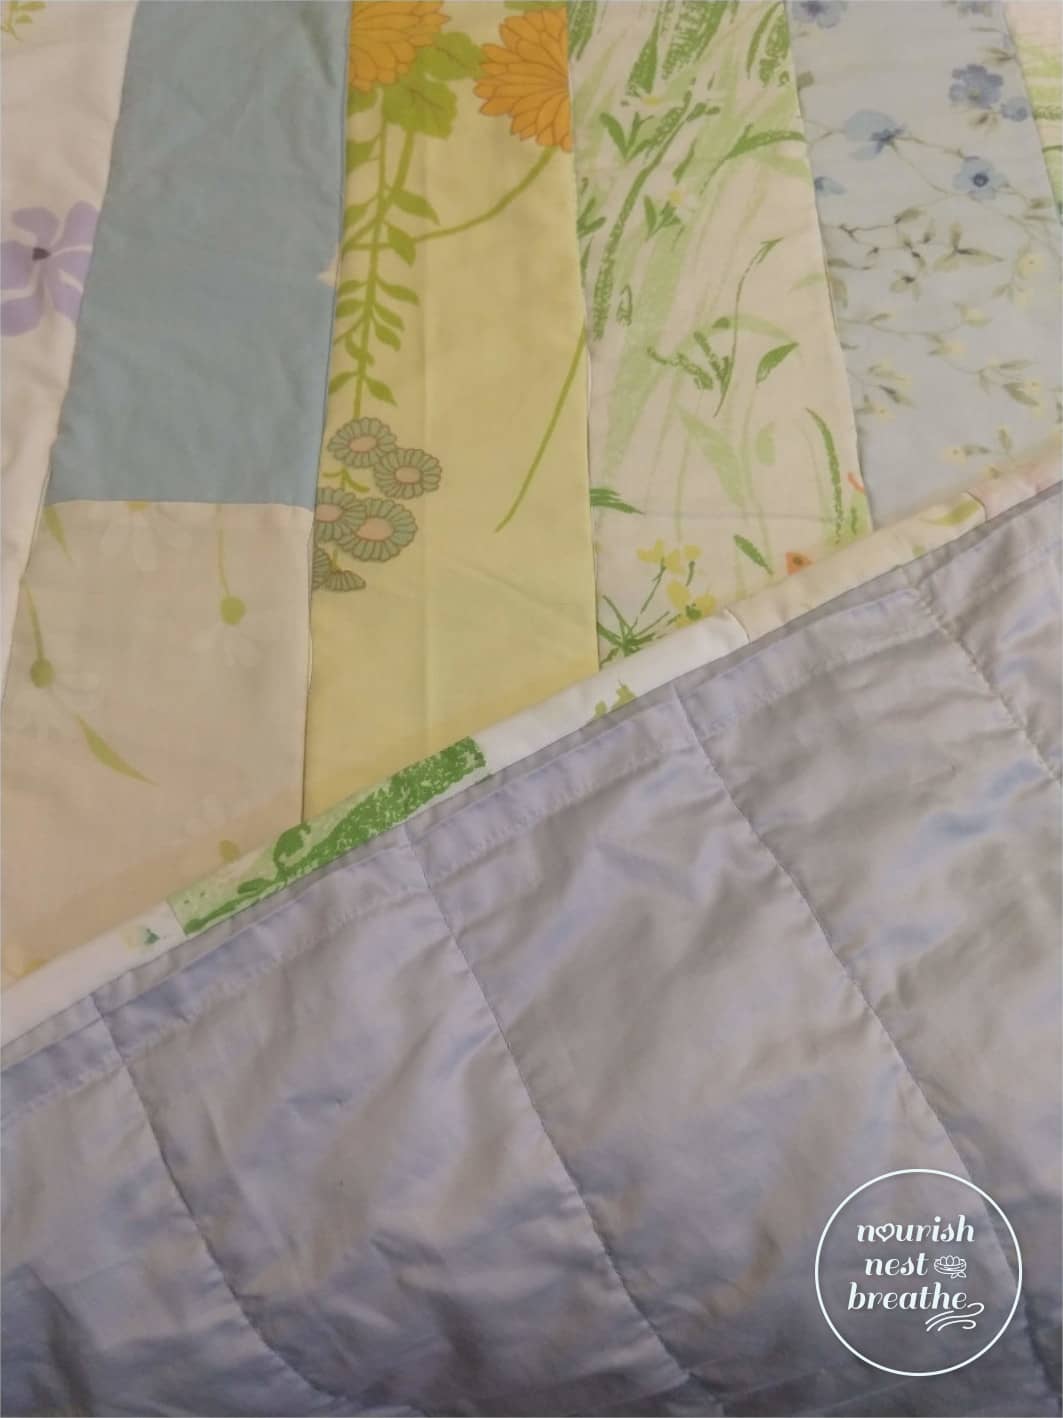 Jelly Roll Quilt - top, binding & back